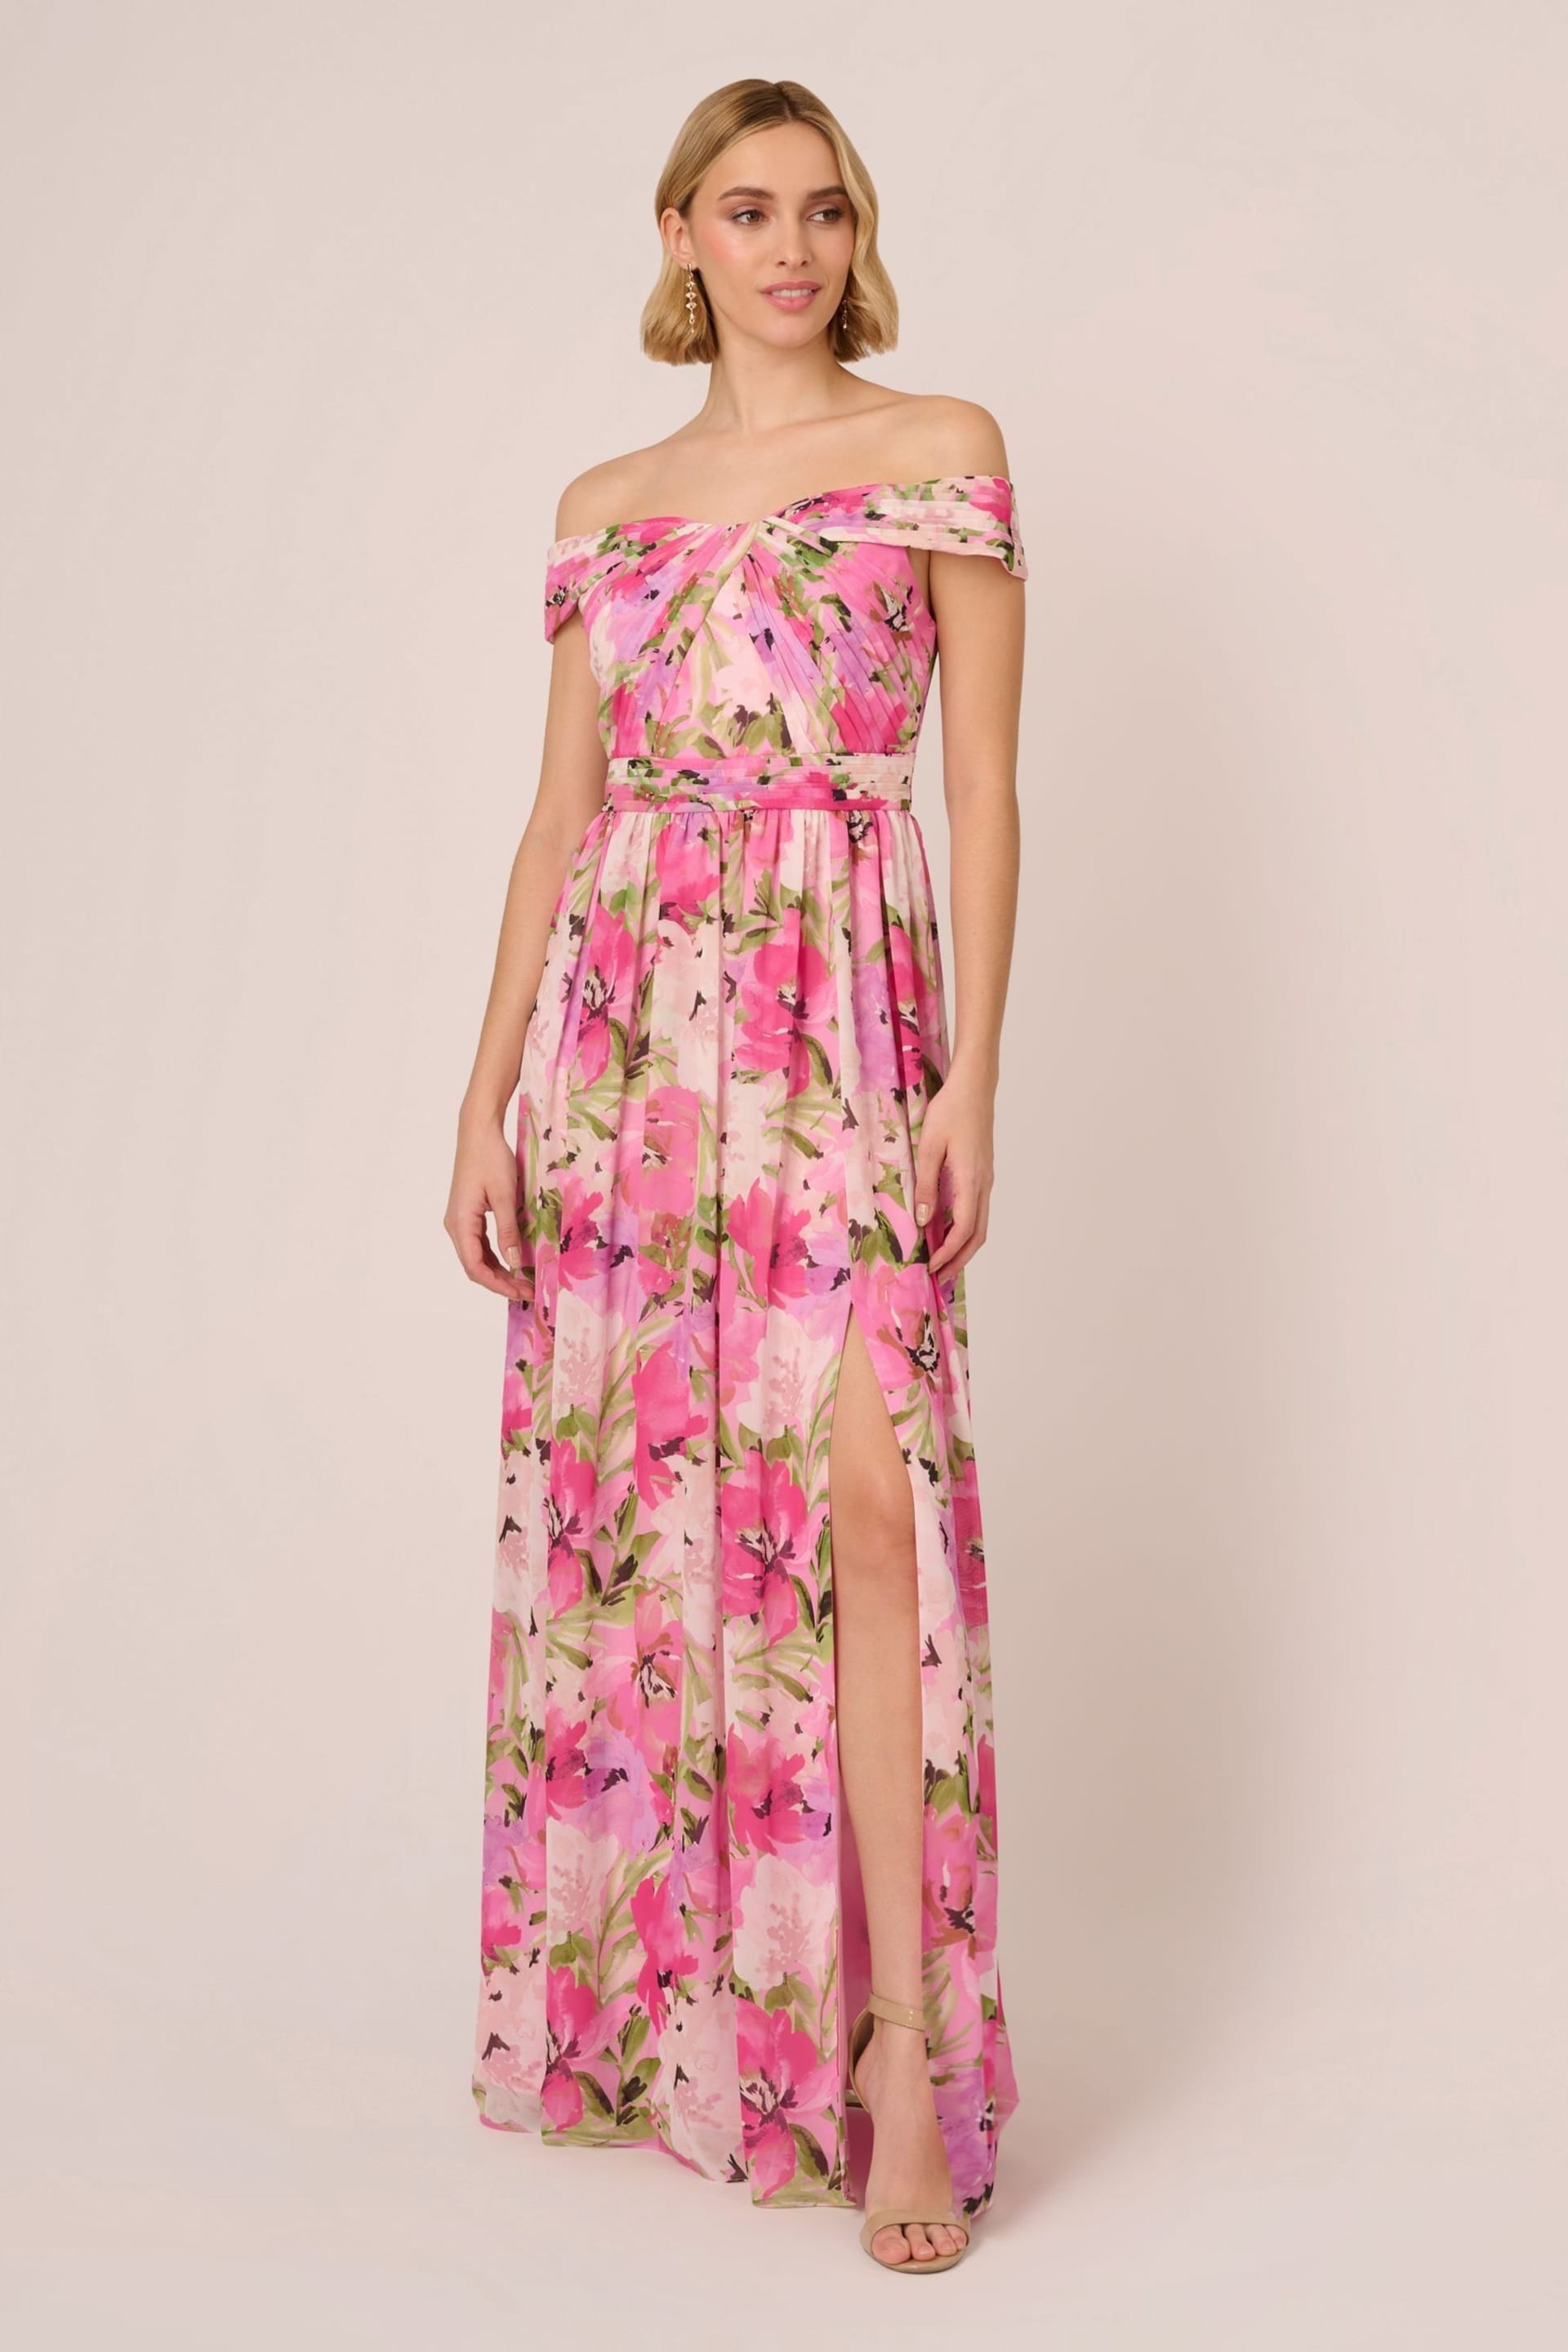 Adrianna Papell Pink Printed Off-Sholder Dress - Image 1 of 7